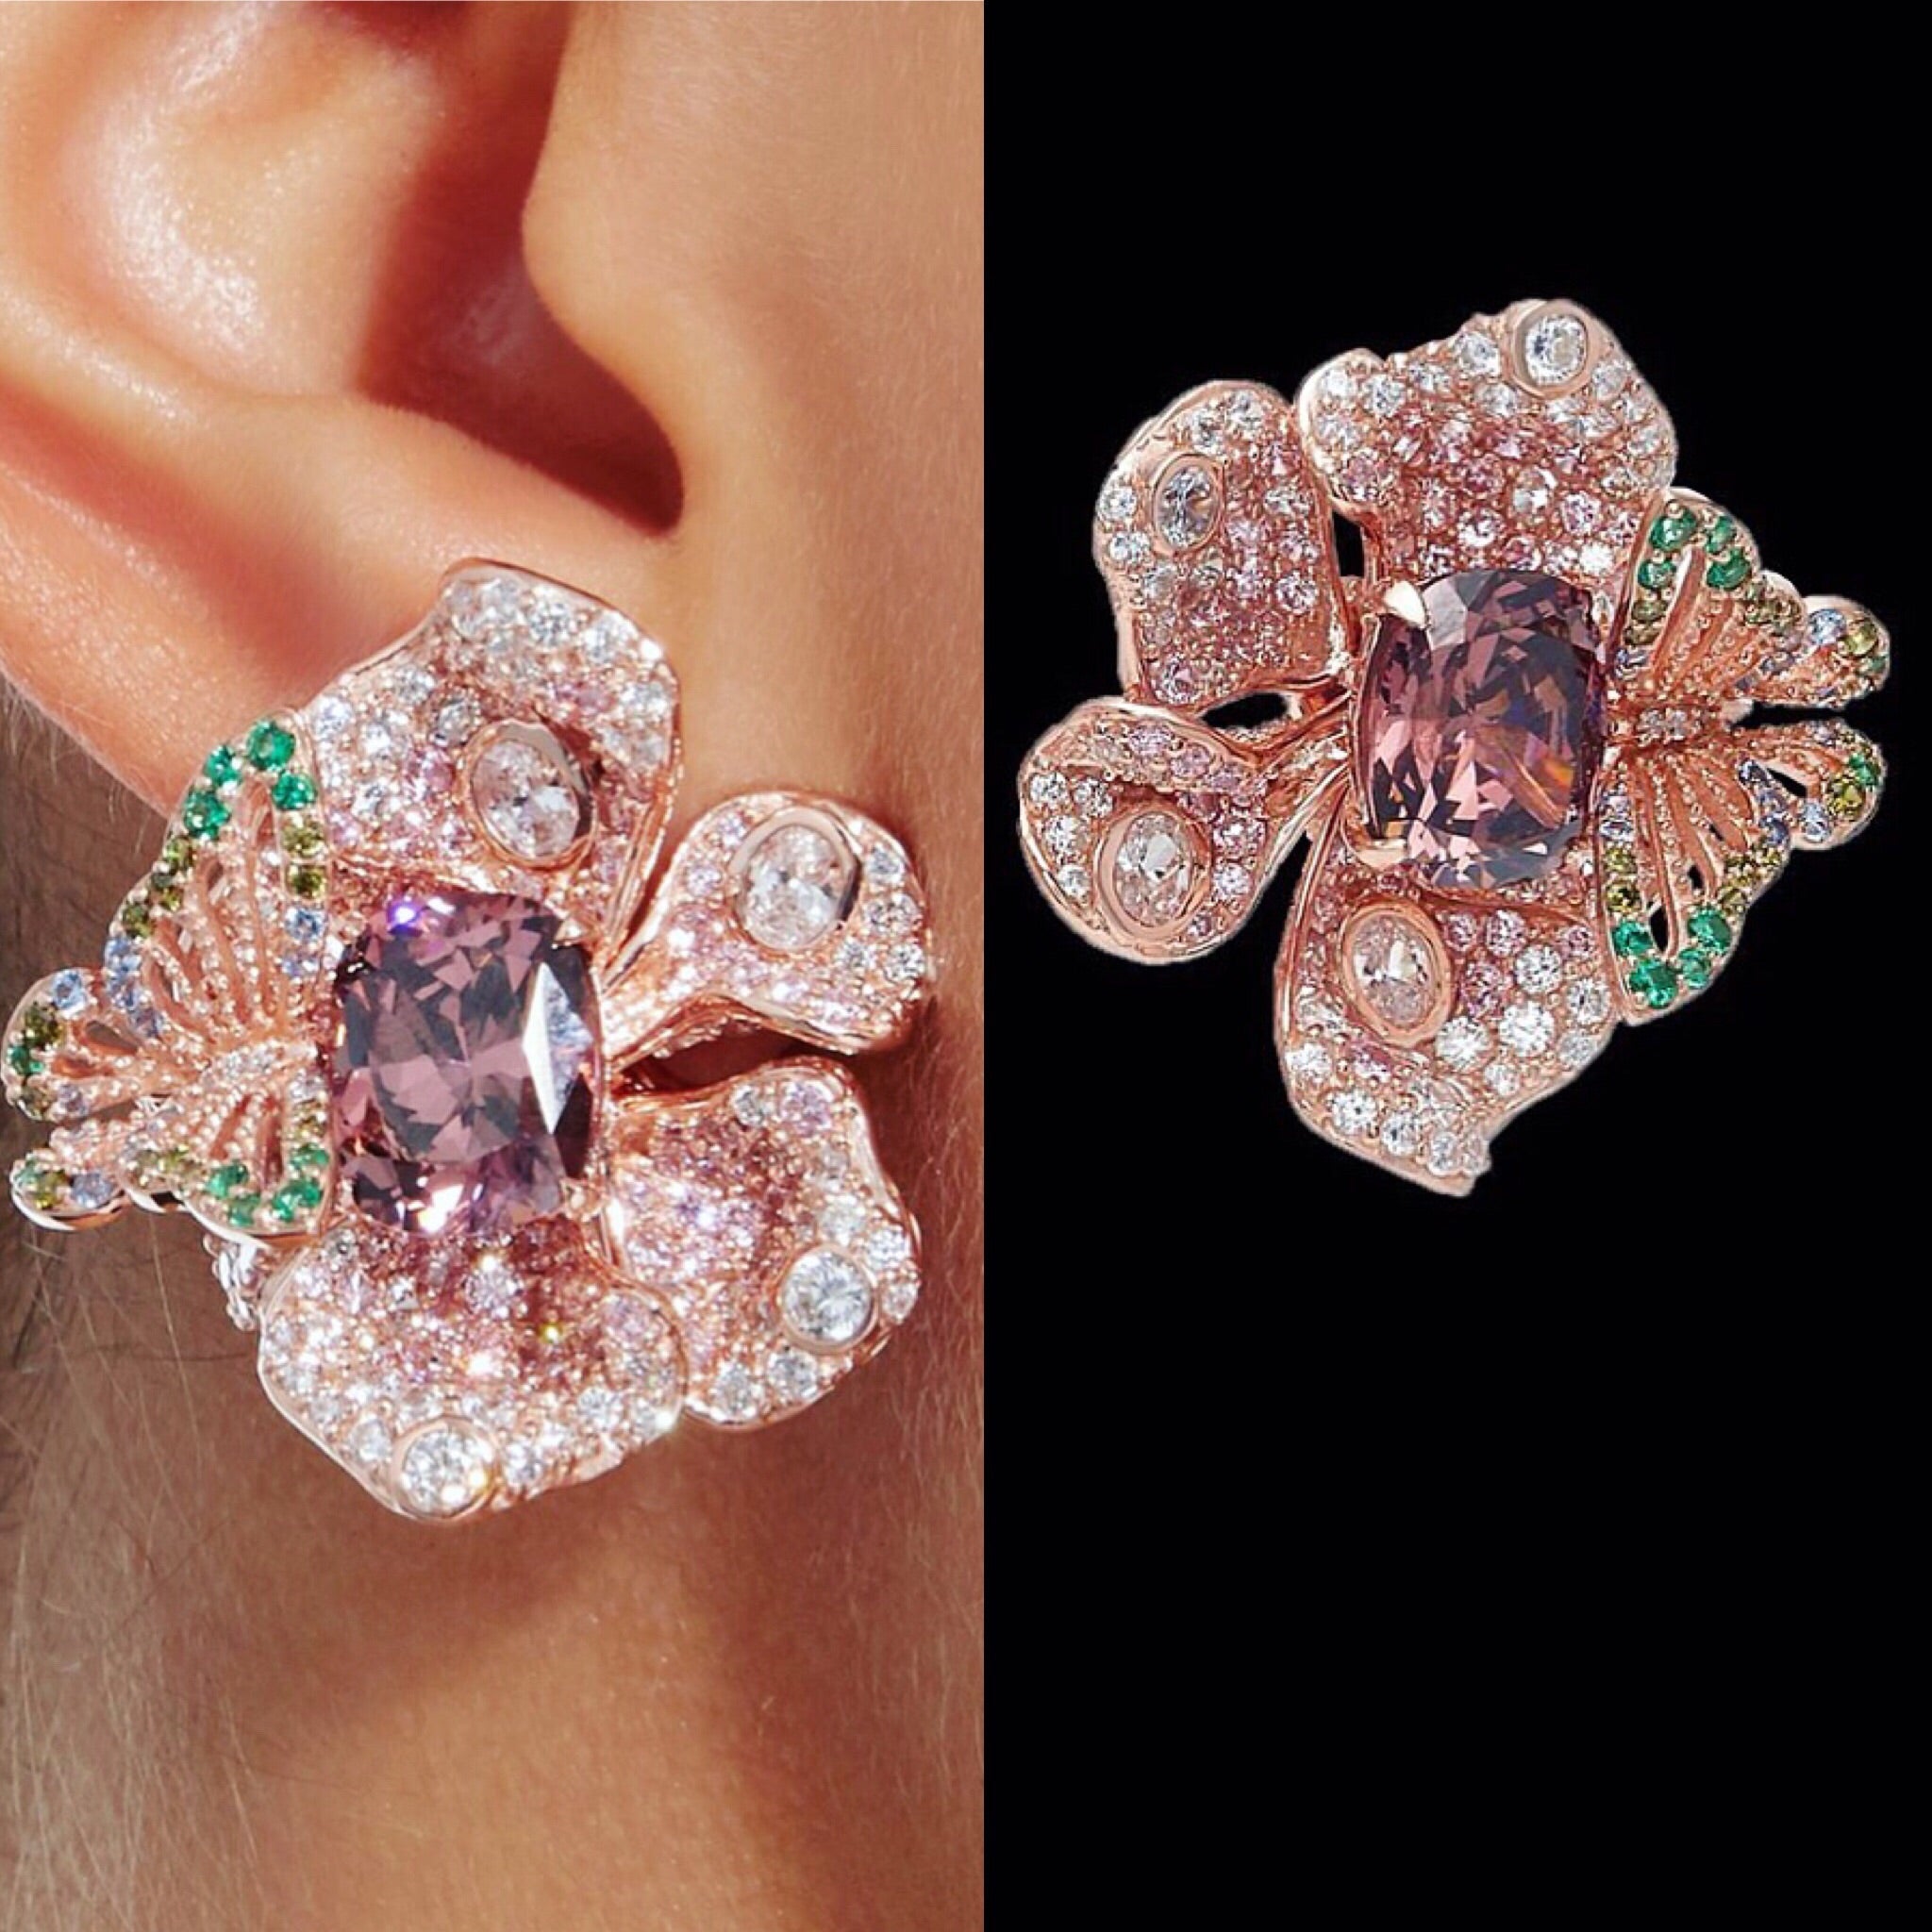 Rose Peony Earrings, Earring, Anabela Chan Joaillerie - Fine jewelry with laboratory grown and created gemstones hand-crafted in the United Kingdom. Anabela Chan Joaillerie is the first fine jewellery brand in the world to champion laboratory-grown and created gemstones with high jewellery design, artisanal craftsmanship and a focus on ethical and sustainable innovations.